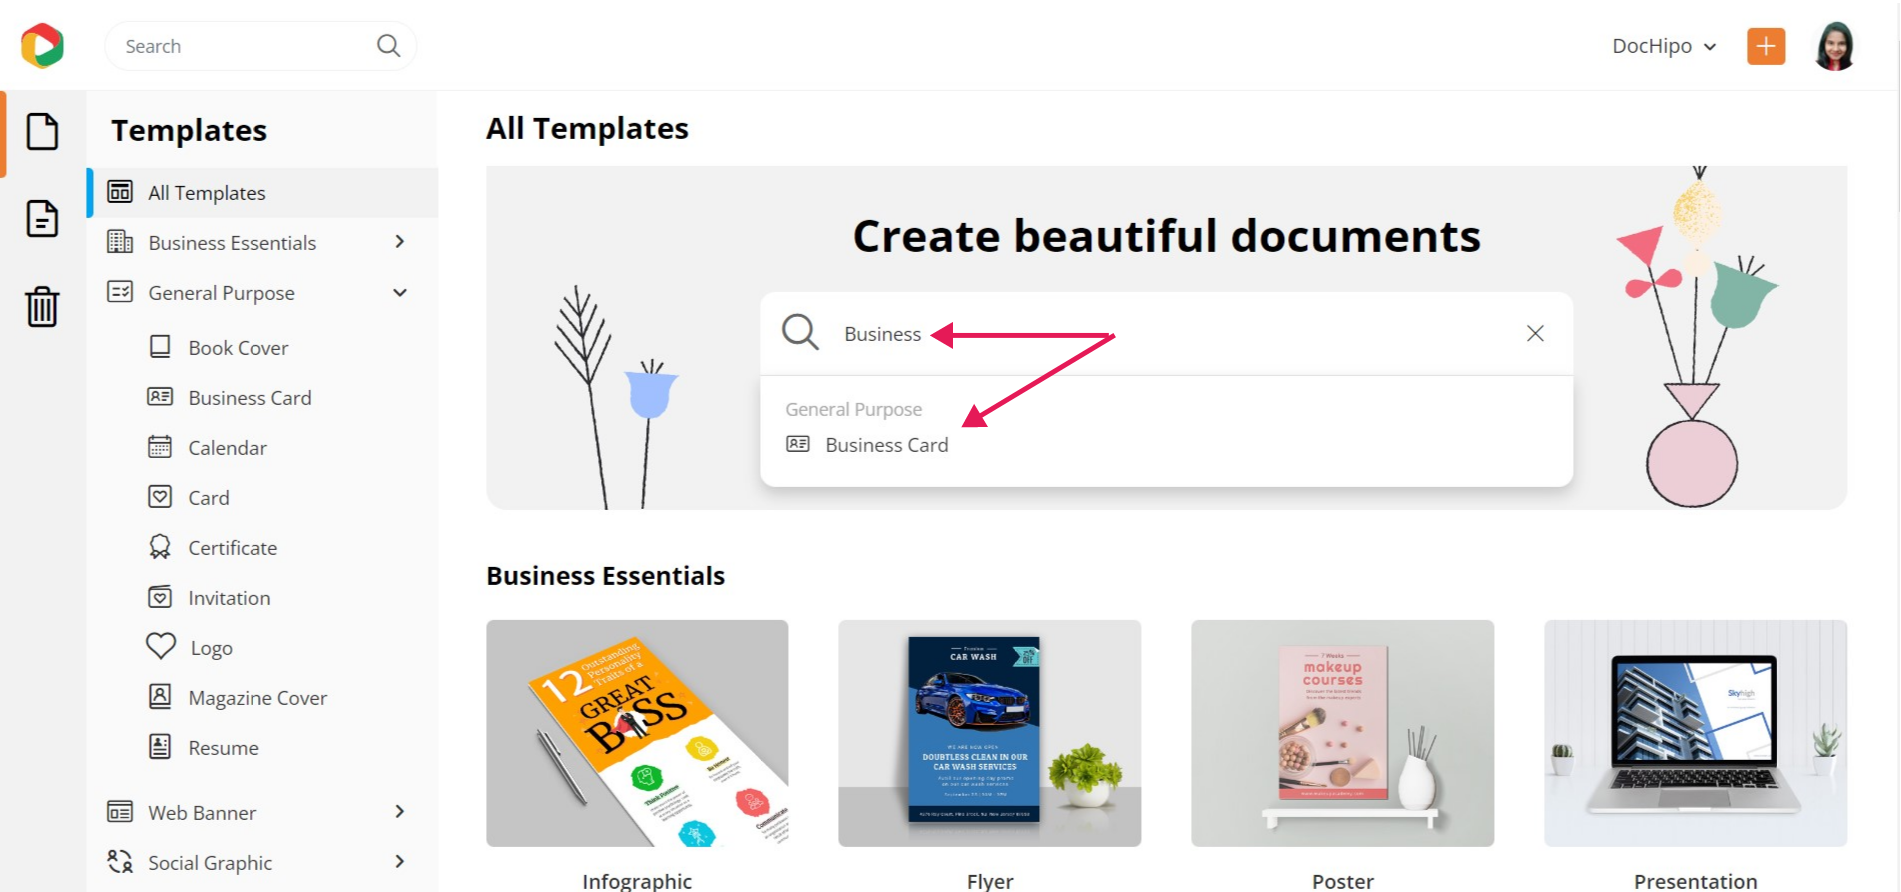 Search for Business Card Document in DocHipo